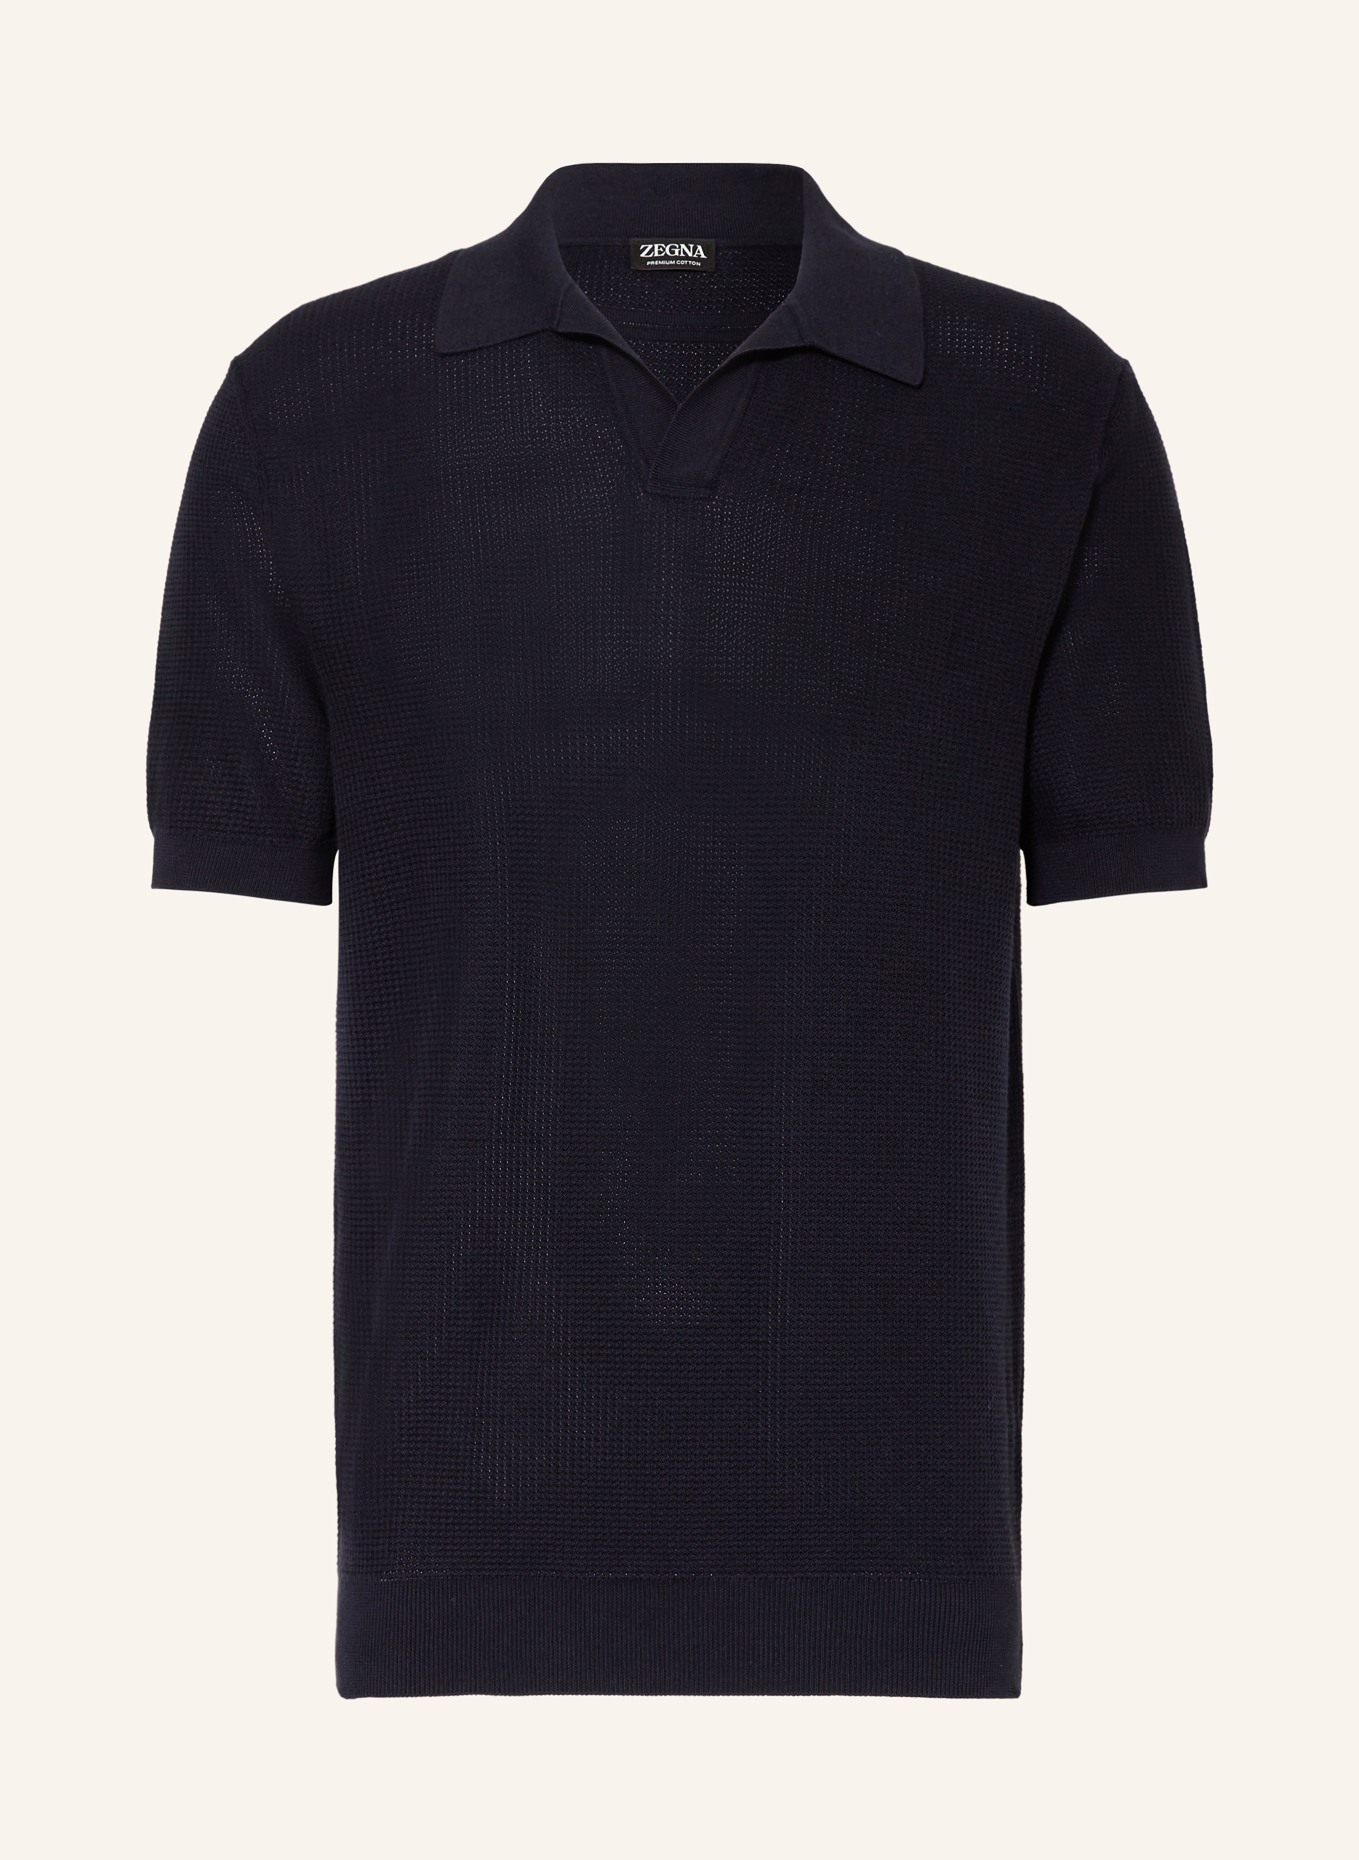 ZEGNA Knitted polo shirt, Color: DARK BLUE (Image 1)